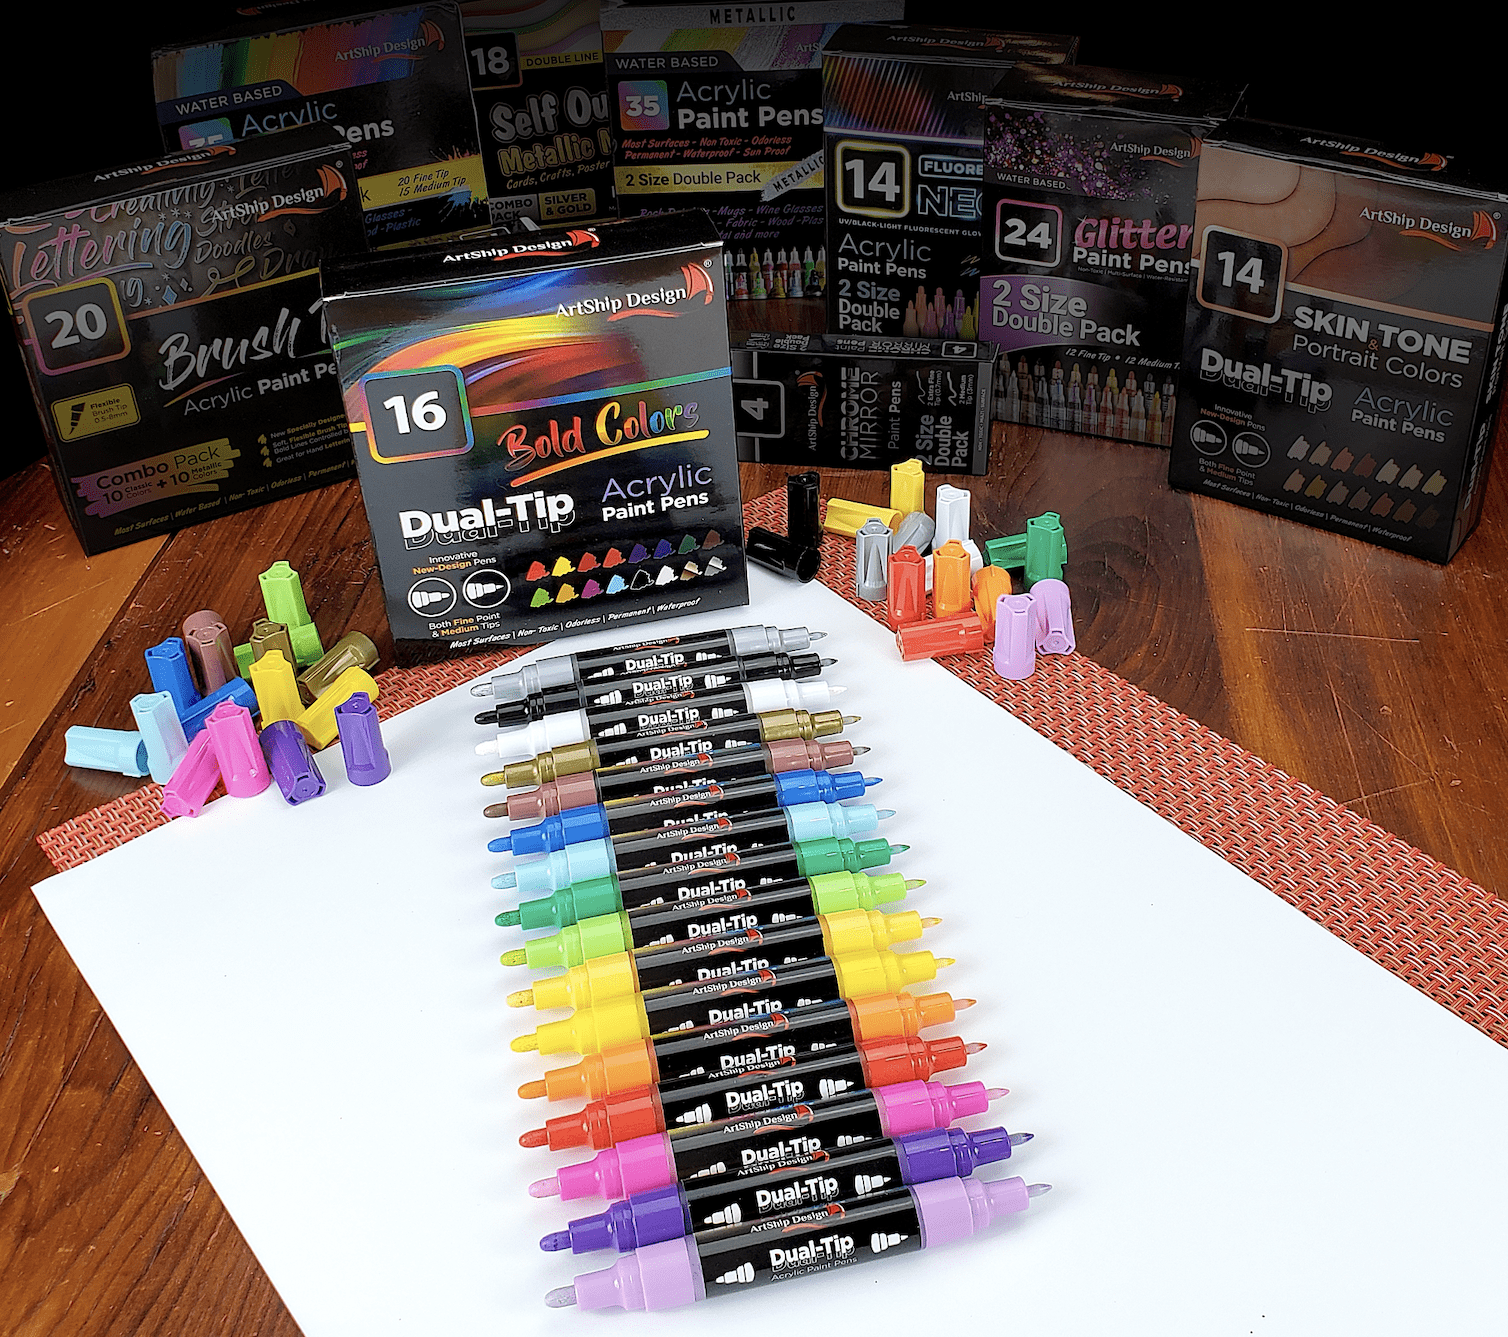 10 Black Acrylic Paint Pens, Double Pack of Both Extra Fine and Medium Tip  Paint Markers - ArtShip Design